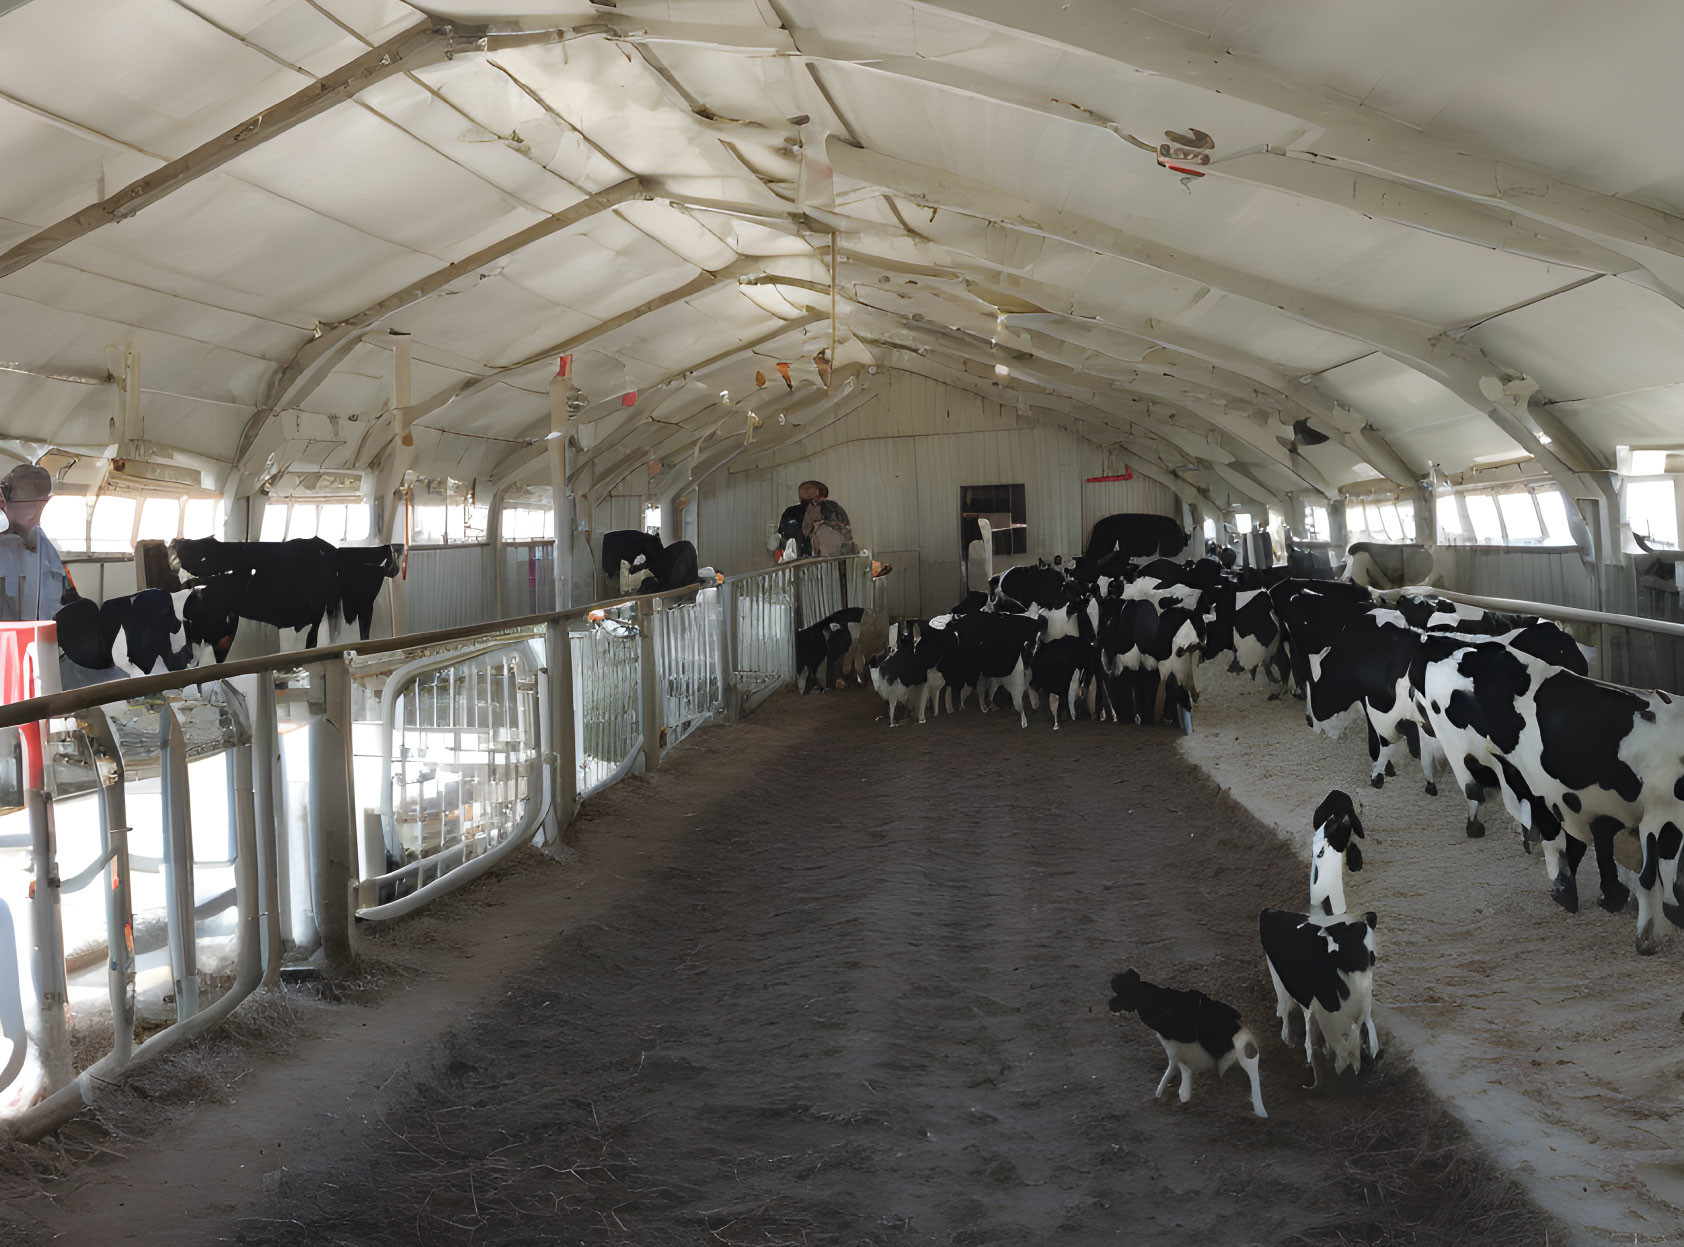 Bright dairy barn with cows, people, and calf in panoramic view